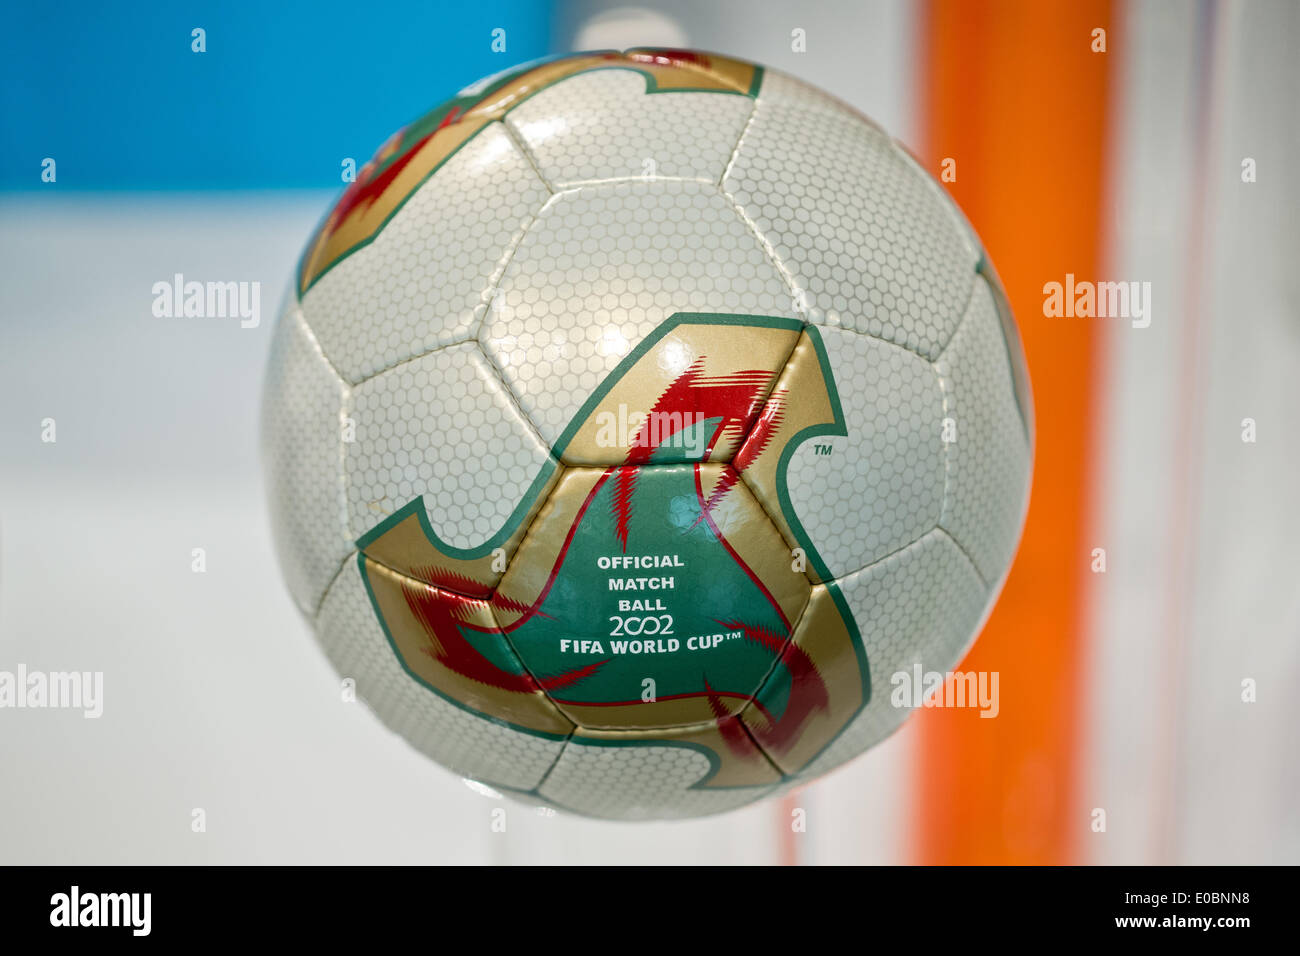 Fuerth, Germany. 08th May, 2014. The 'Fevernova' soccer ball which was the official ball of the 2002 soccer world cup in South Korea is pictured during the general meeting of sporting goods manufacturer adidas in Fuerth, Germany, 08 May 2014. © dpa/Alamy Live News Stock Photo